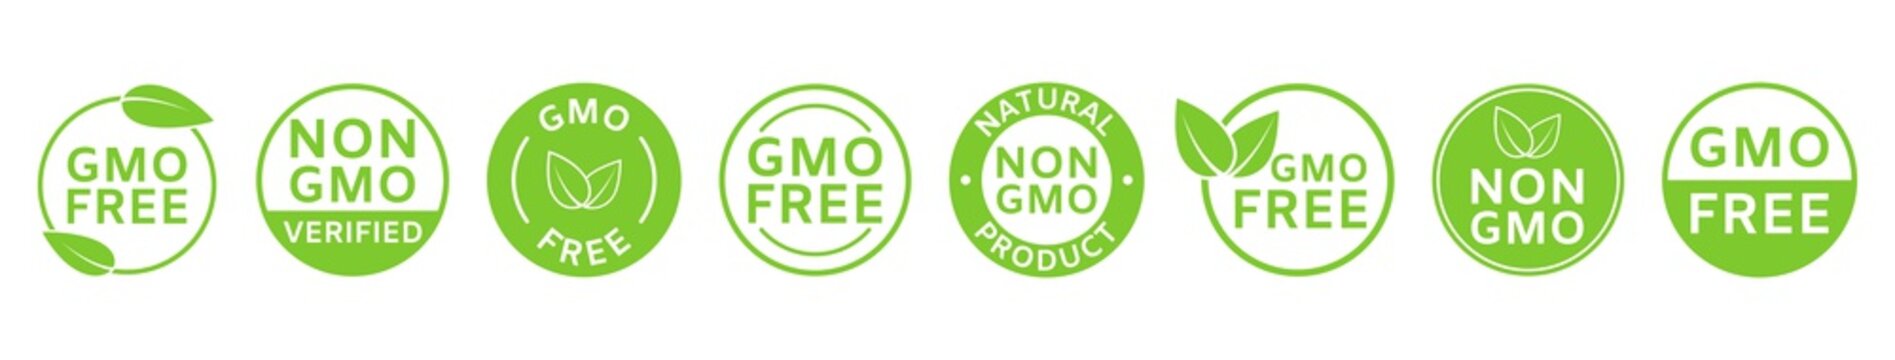 Non GMO labels. GMO free icons. Healthy organic food concept. No GMO design elements for tags, product packag, food symbol, emblems, stickers. Eco, vegan, bio. Vector illustration